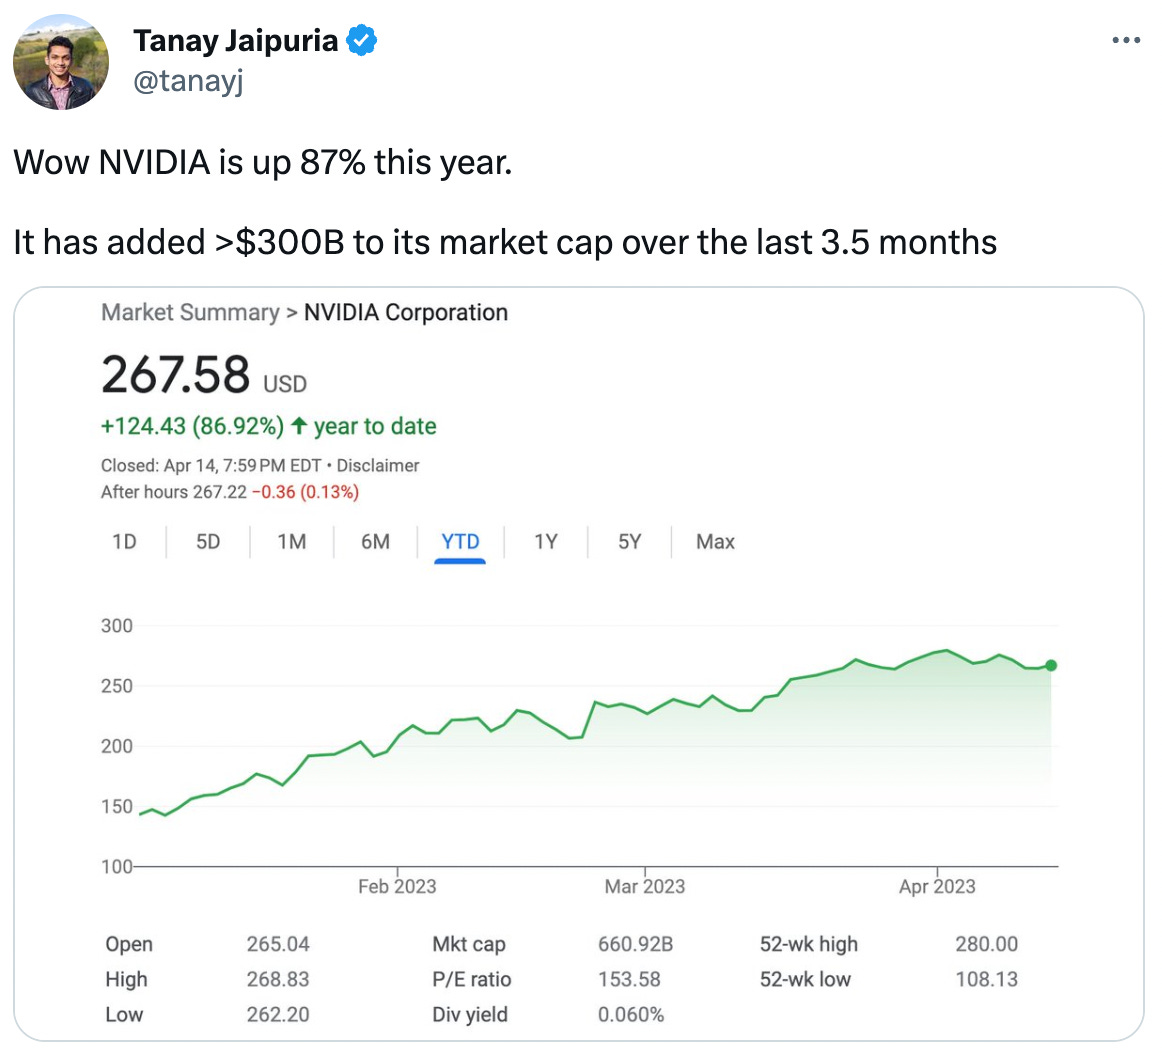  Tanay Jaipuria @tanayj Wow NVIDIA is up 87% this year.  It has added >$300B to its market cap over the last 3.5 months